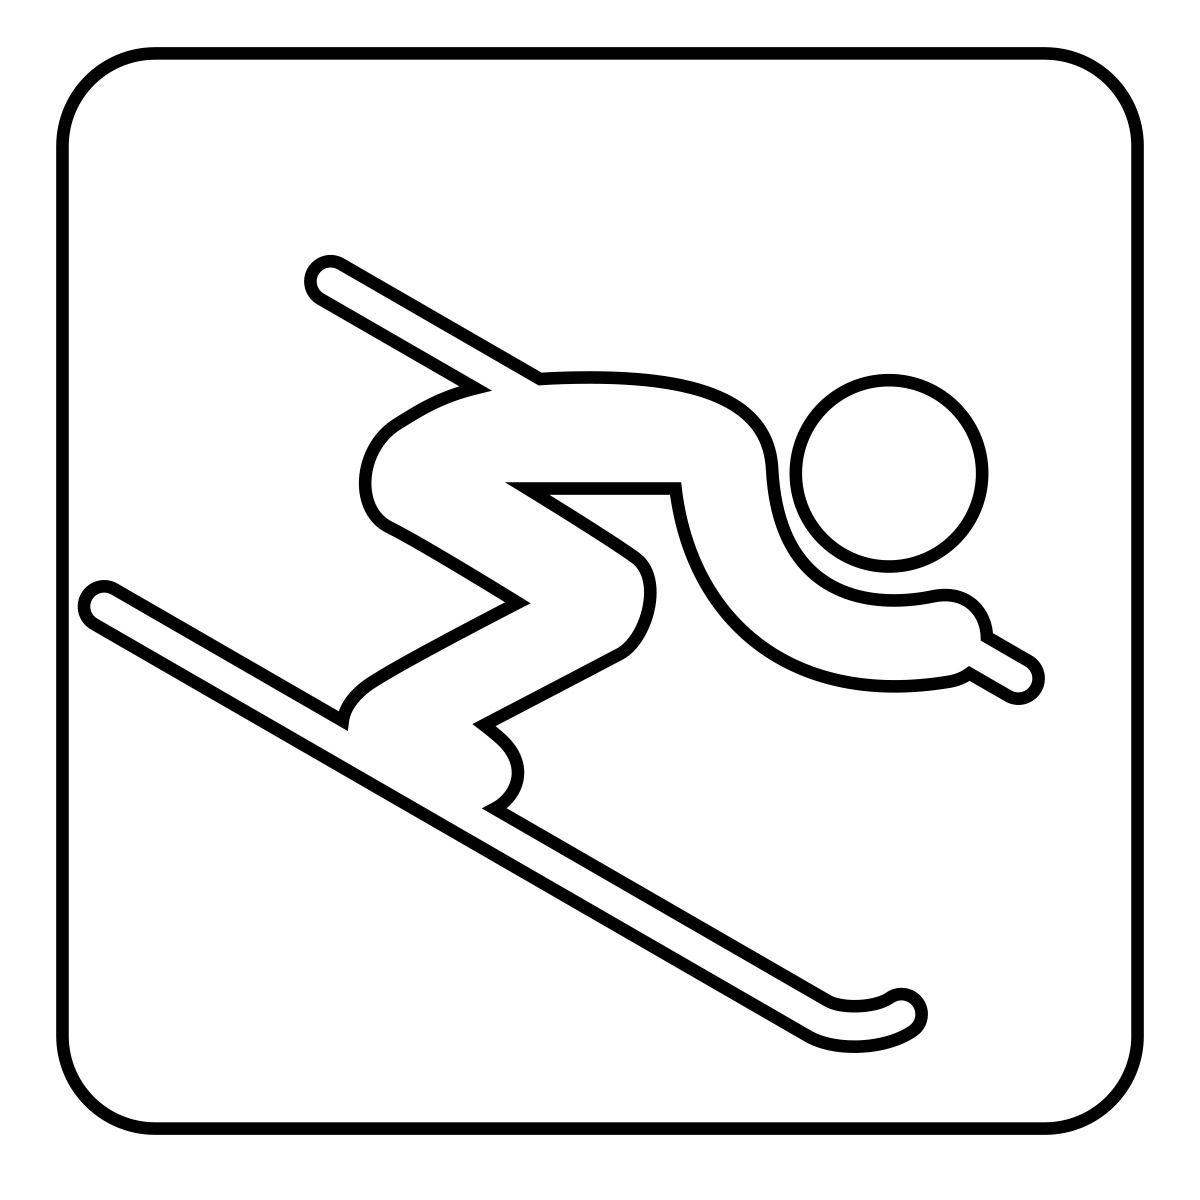 Olympics clipart black and white